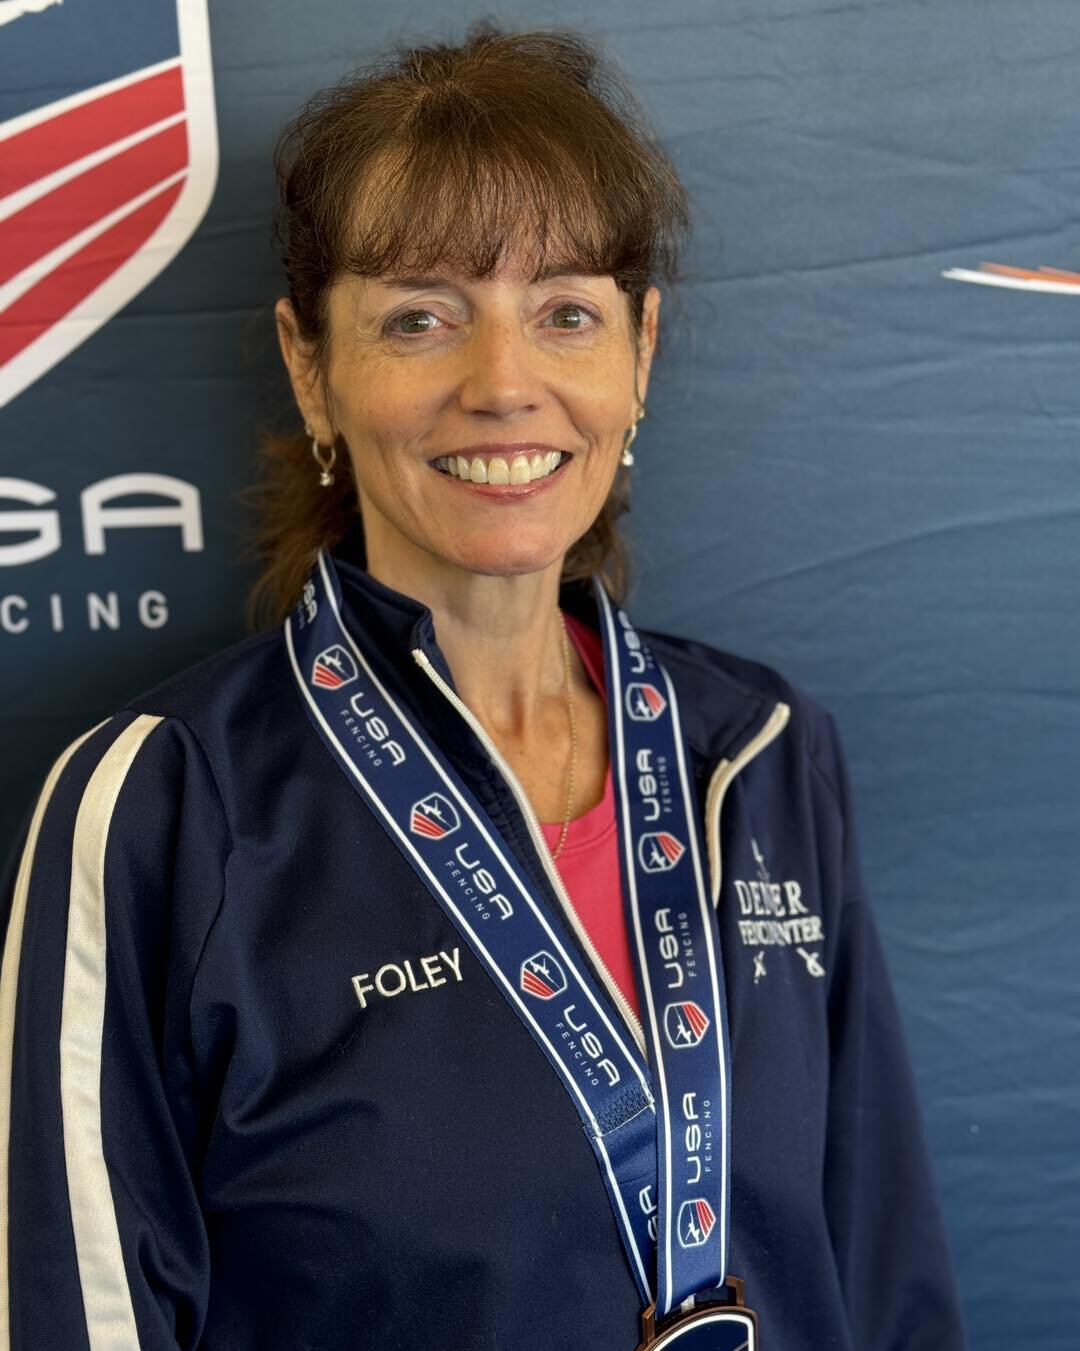 Congratulations to Eileen Foley on her 7th place finish in Vet 50 Women&rsquo;s Sabre. 

#denvercolorado #fencinglife #denverfencingcenter #epee #denver #fencing #denverfencing #sabre #and #womensabre #vetsabre #vetsabrefencing